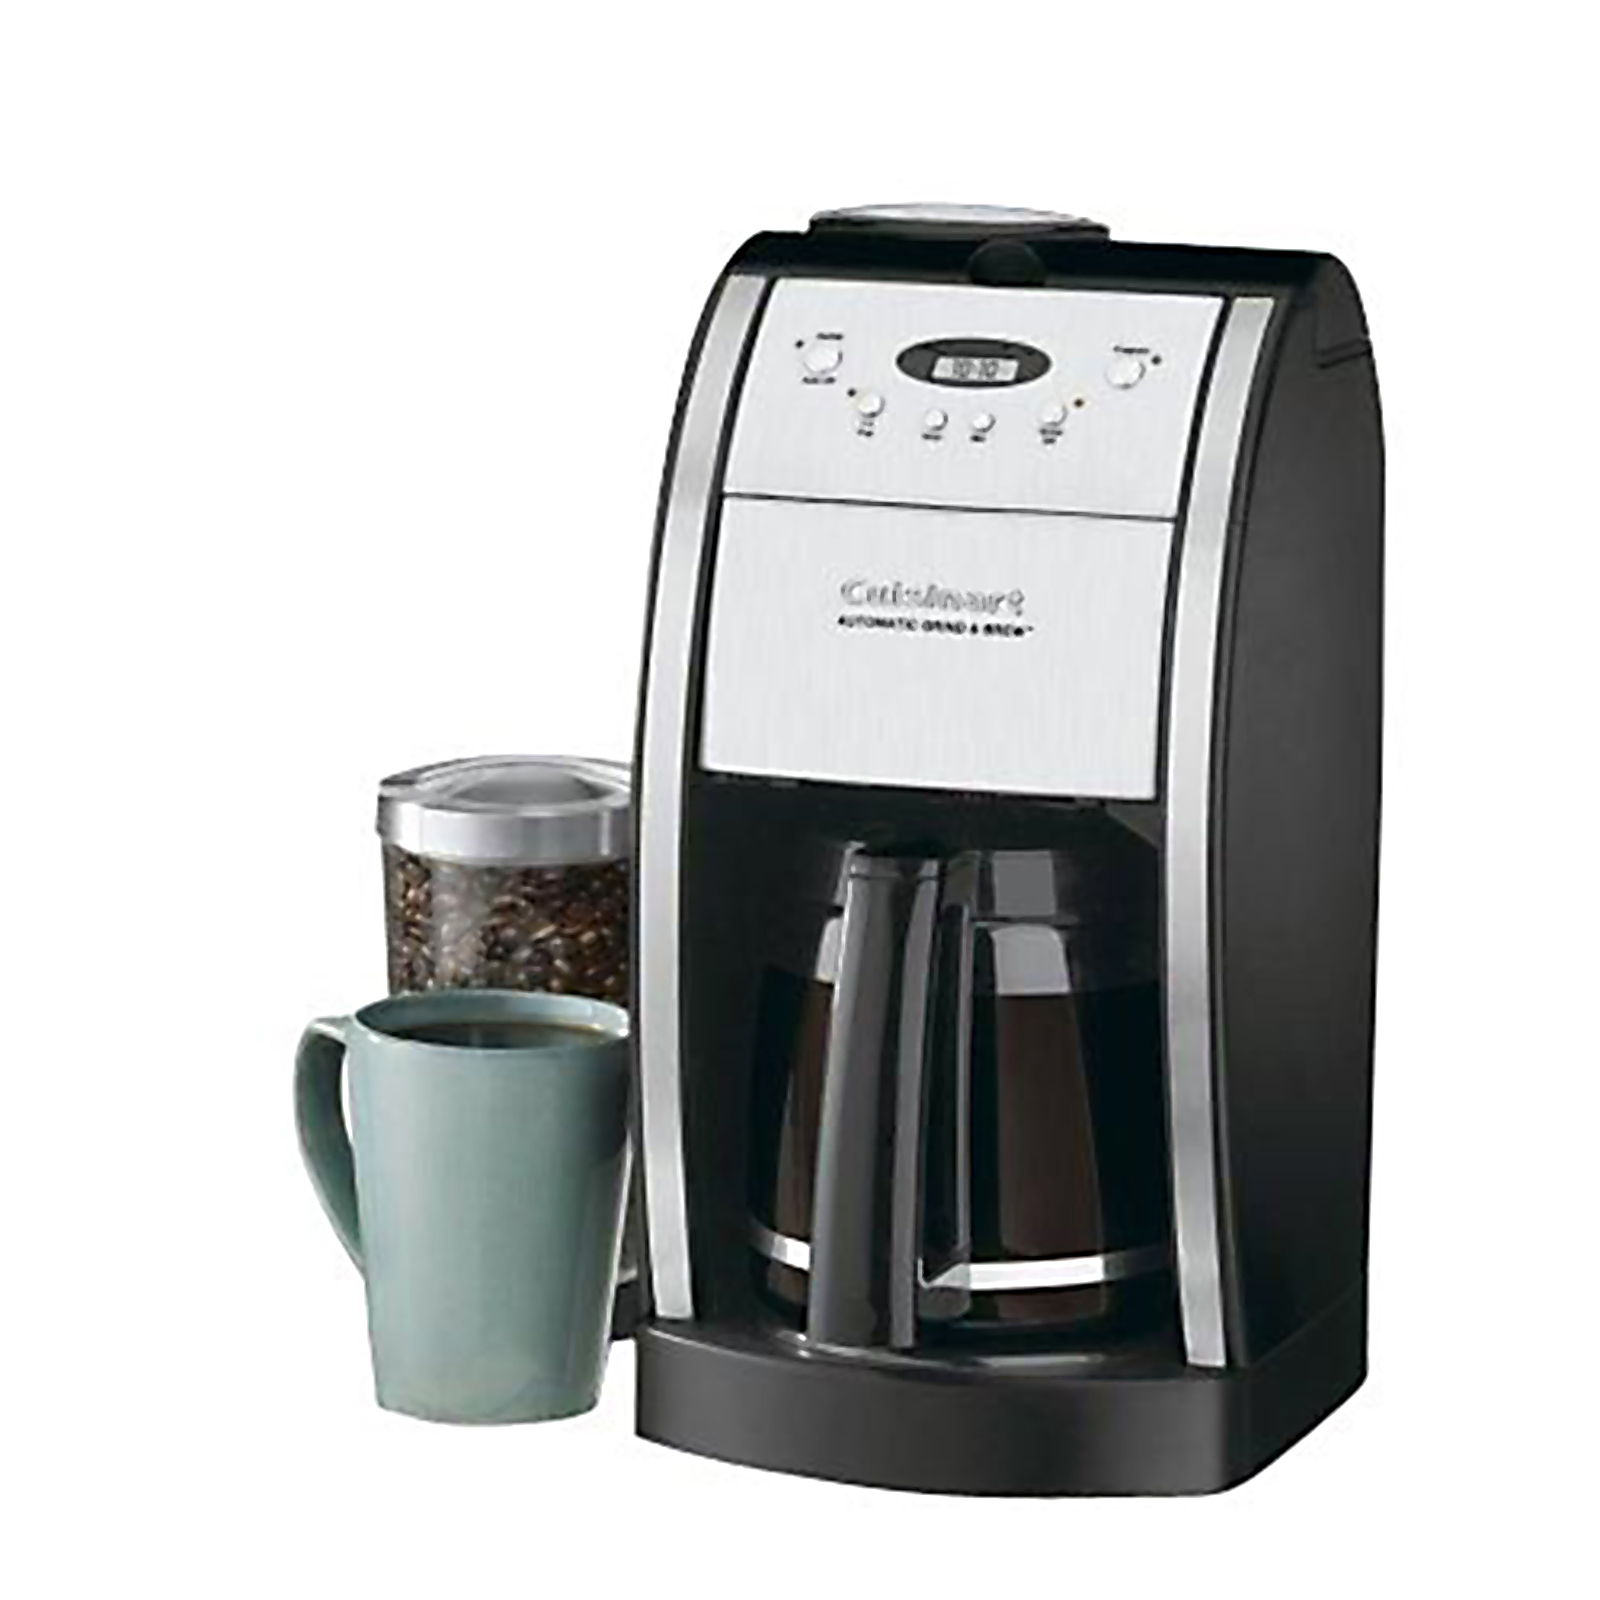 Cuisinart Coffee Maker 12 Cup Instructions : Cuisinart DCC-1200BW Brew ...